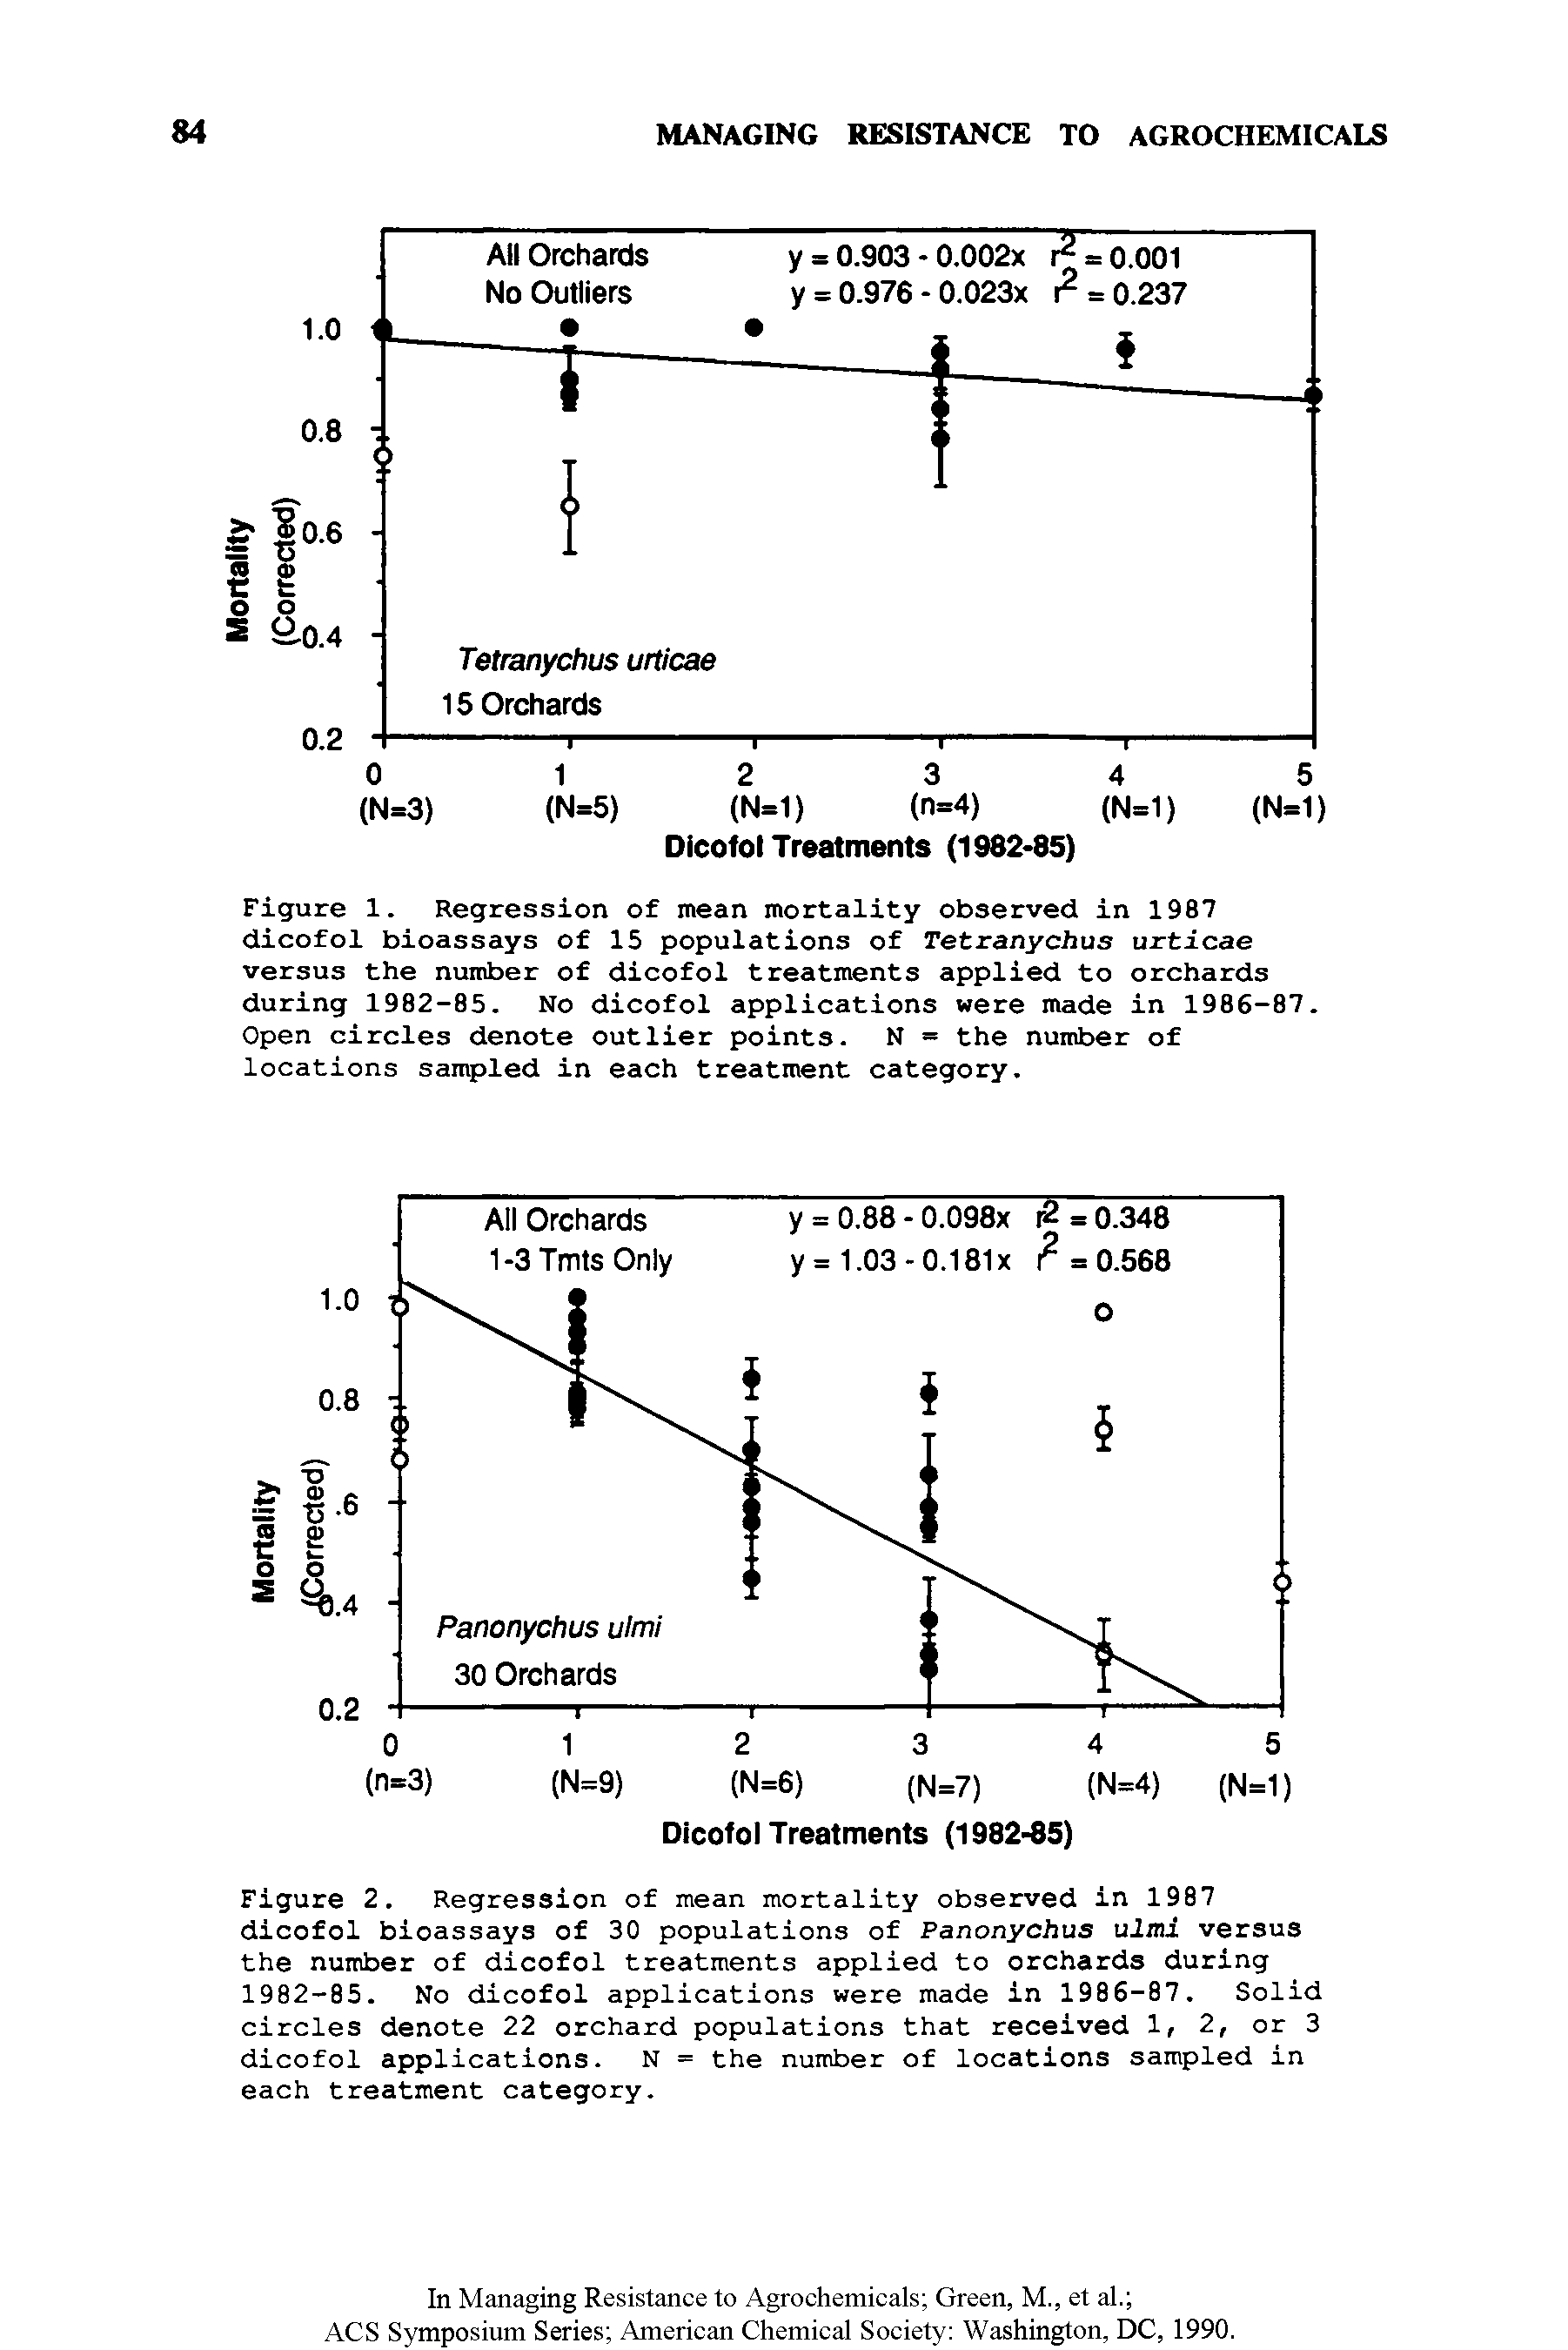 Figure 2. Regression of mean mortality observed in 1987 dicofol bioassays of 30 populations of Panonychus ulmi versus the number of dicofol treatments applied to orchards during 1982-85. No dicofol applications were made in 1986-87. Solid circles denote 22 orchard populations that received 1, 2, or 3 dicofol applications. N = the number of locations sampled in each treatment category.